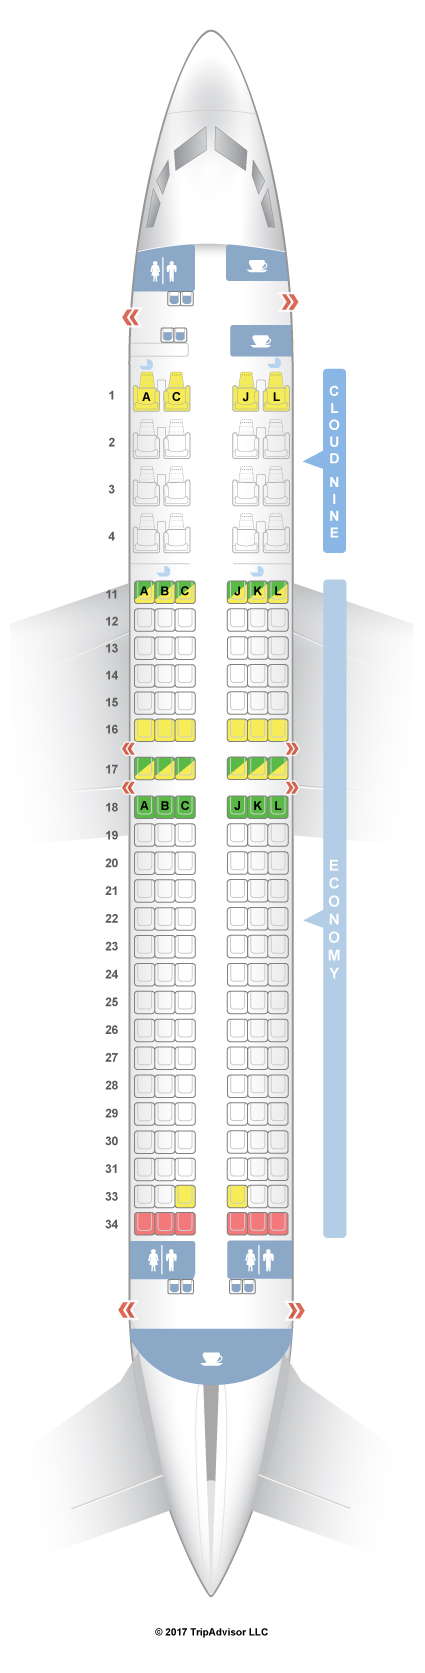 Boeing 737 800 American Seating Chart